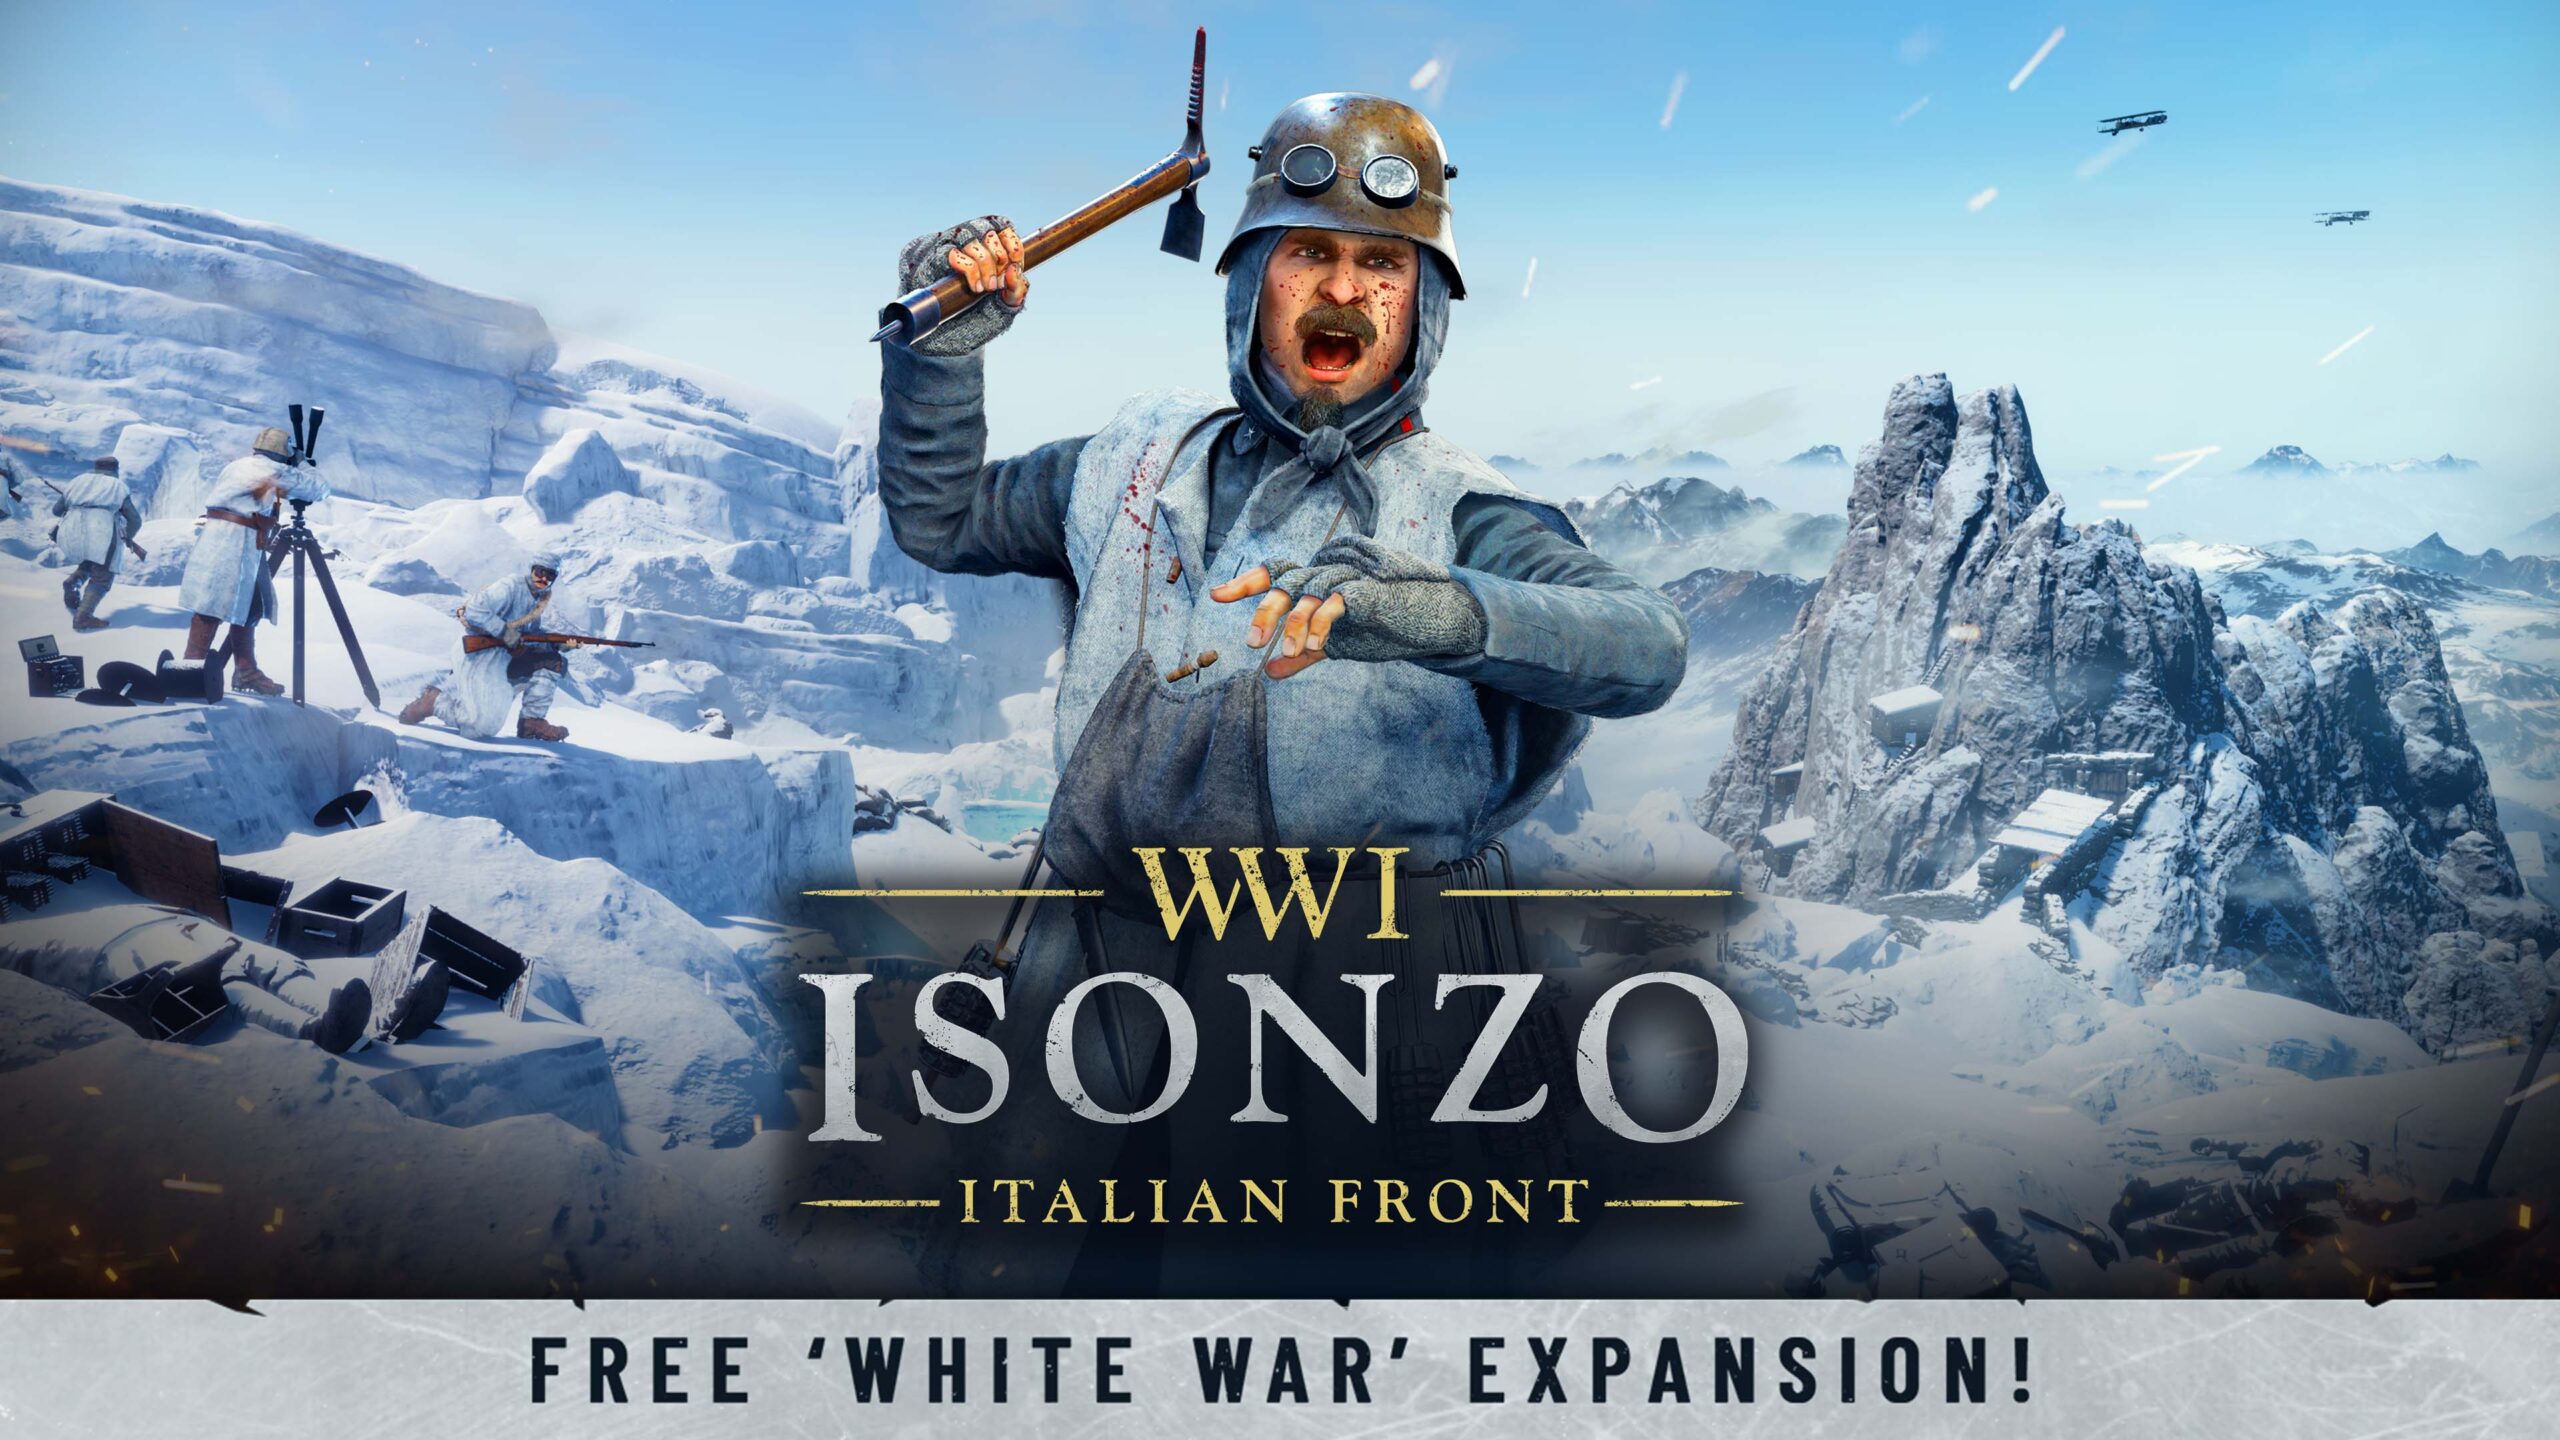 Xbox Store Banner Assets White War Titled Hero Art 16 9 3840X2160 5Aa5C87C05A58263Beac Scaled New Free Map Set In The Icy Marmolada Glacier Tunnels